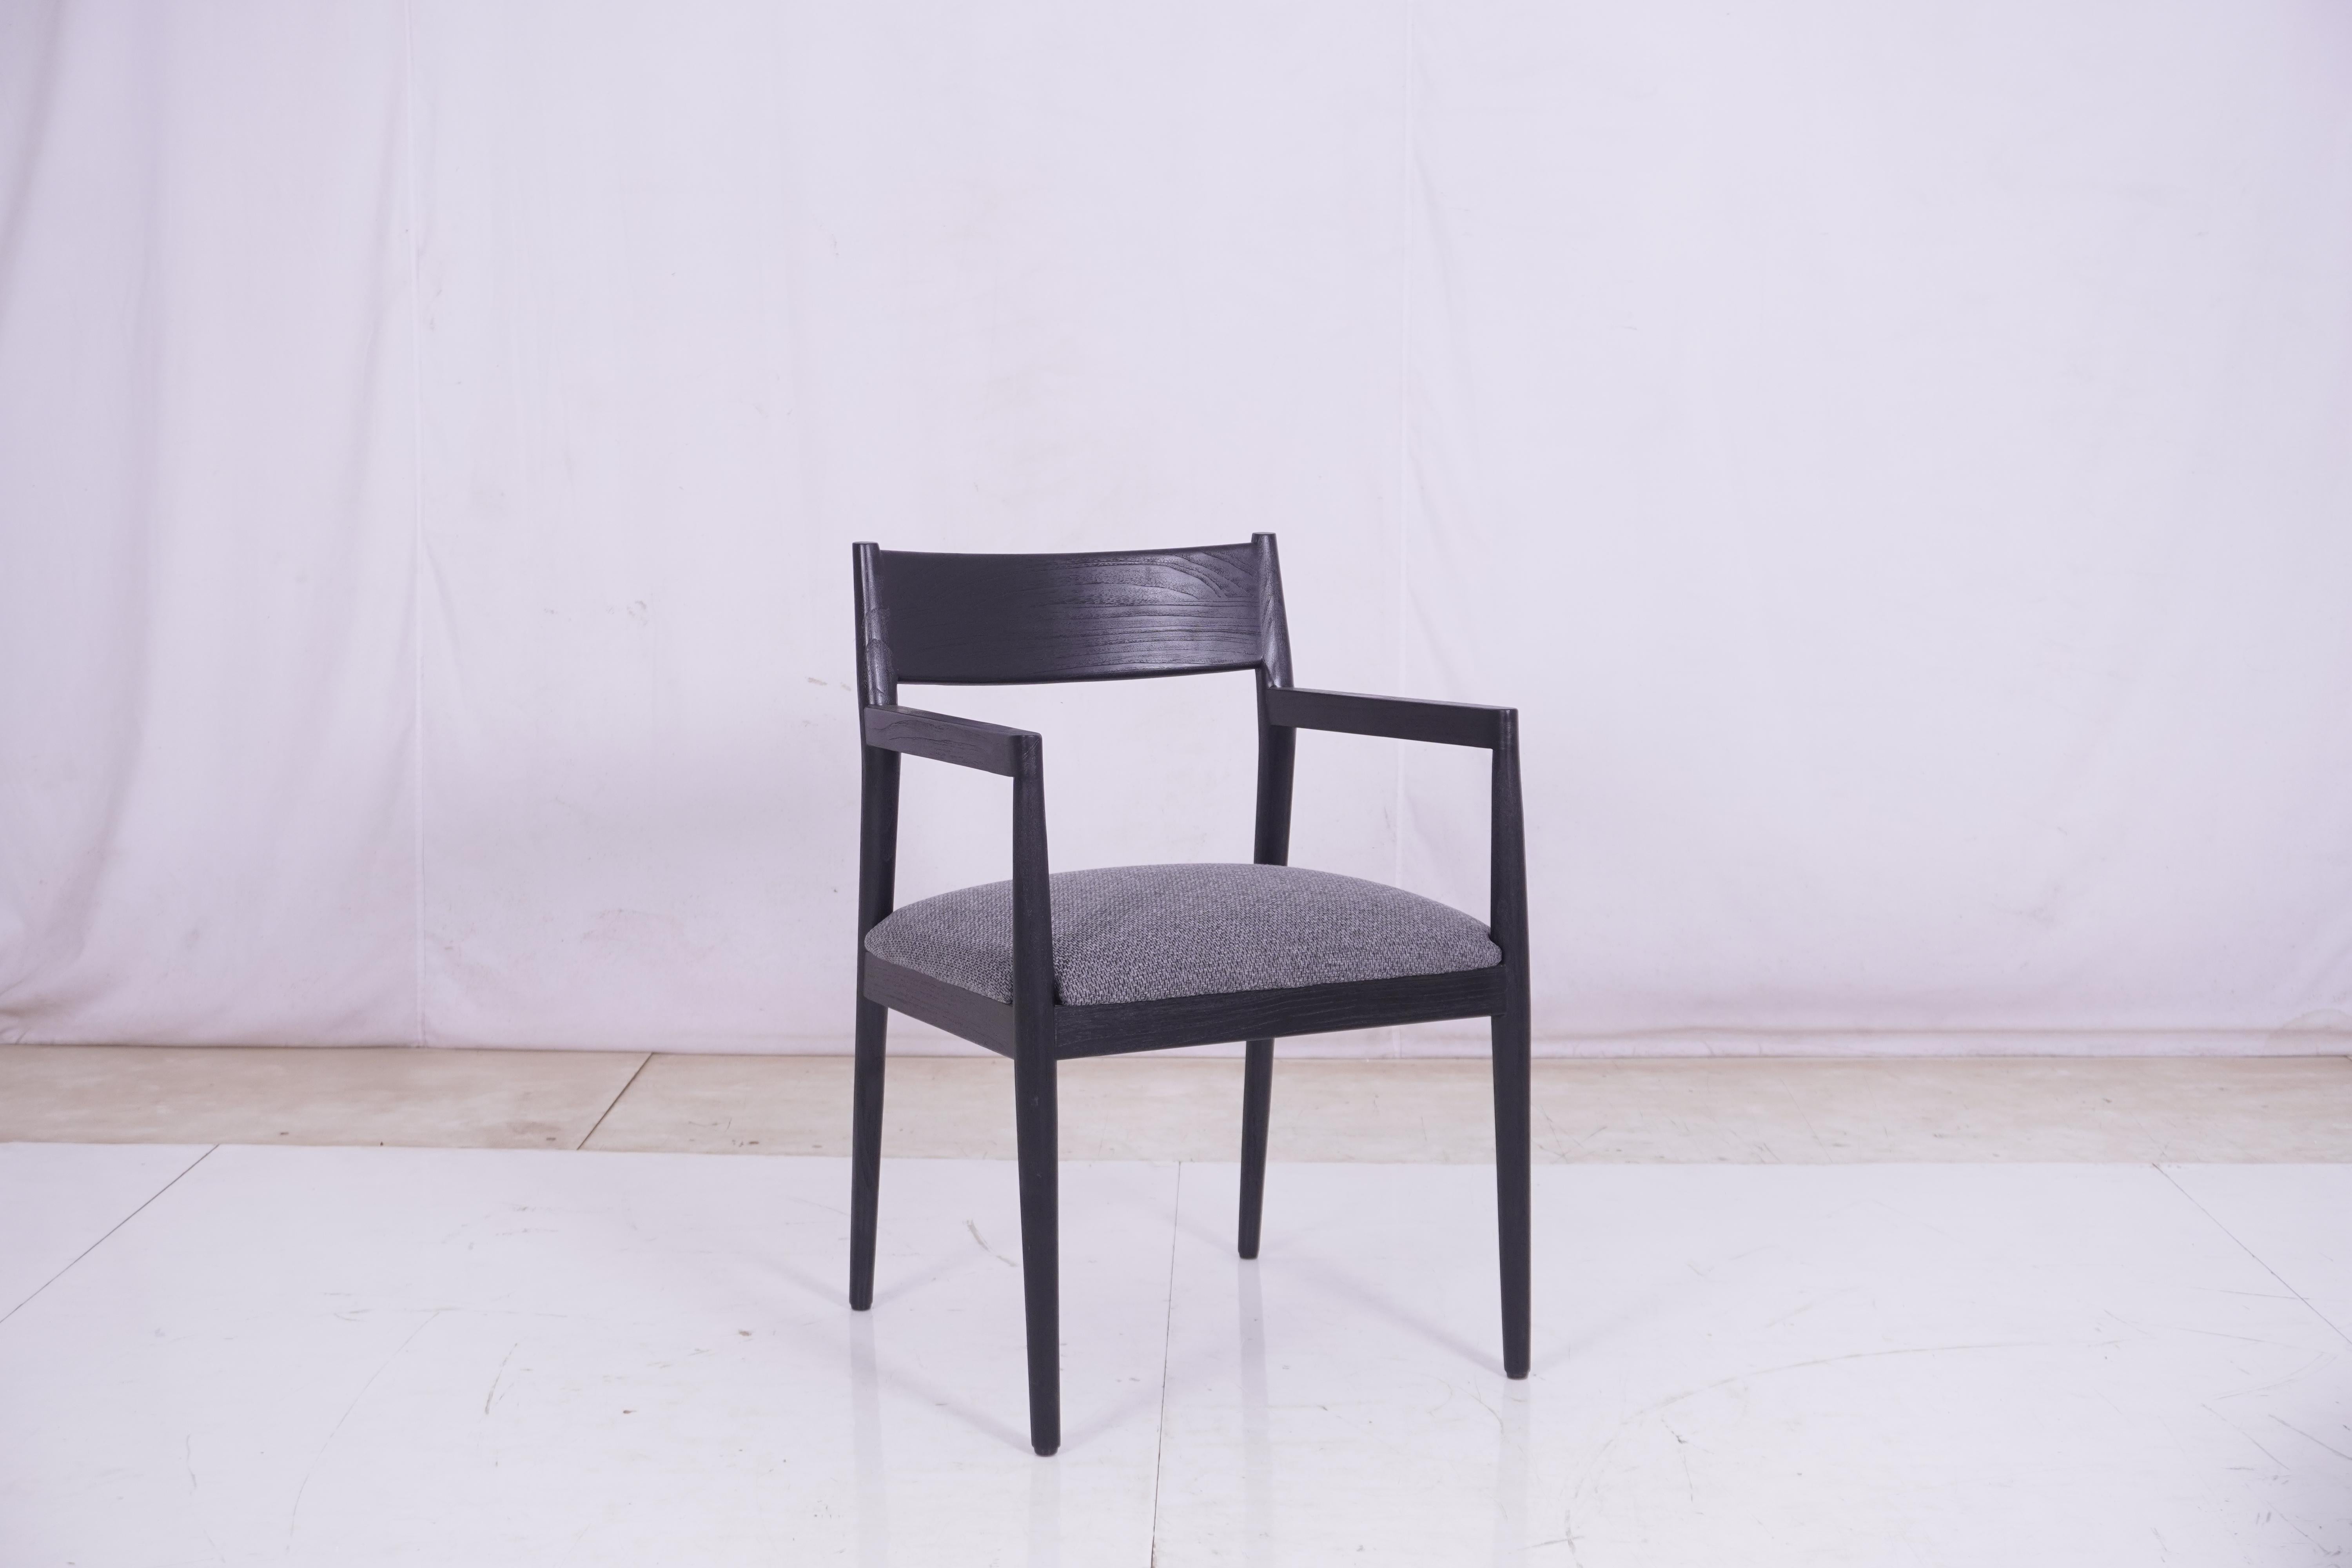 Javanese Harper Dining Chair Armchair, Teak Wood in a Black Finish. Set of 6 chairs For Sale